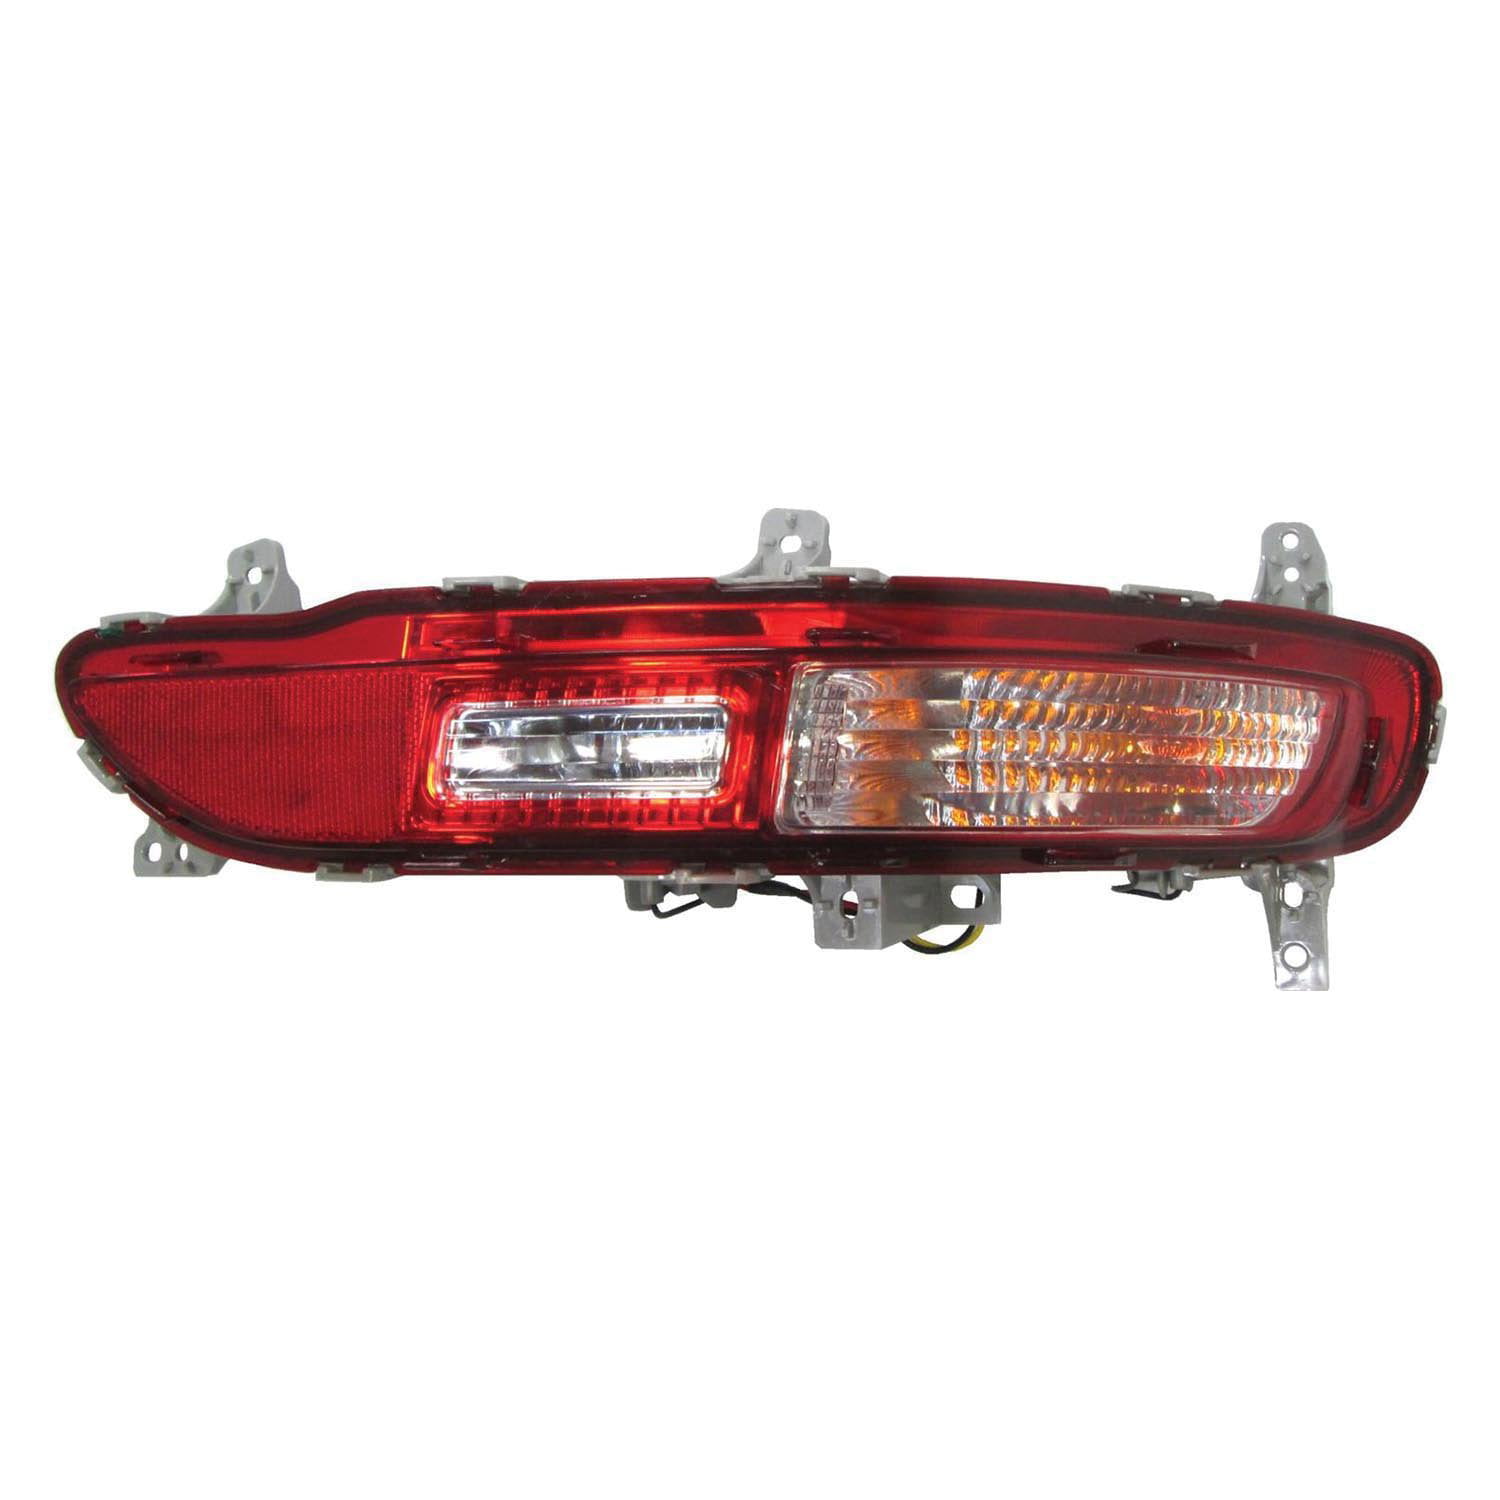 New Replacement for OE Driver Back Up Light Assembly Fits 2017-2019 Sportage 